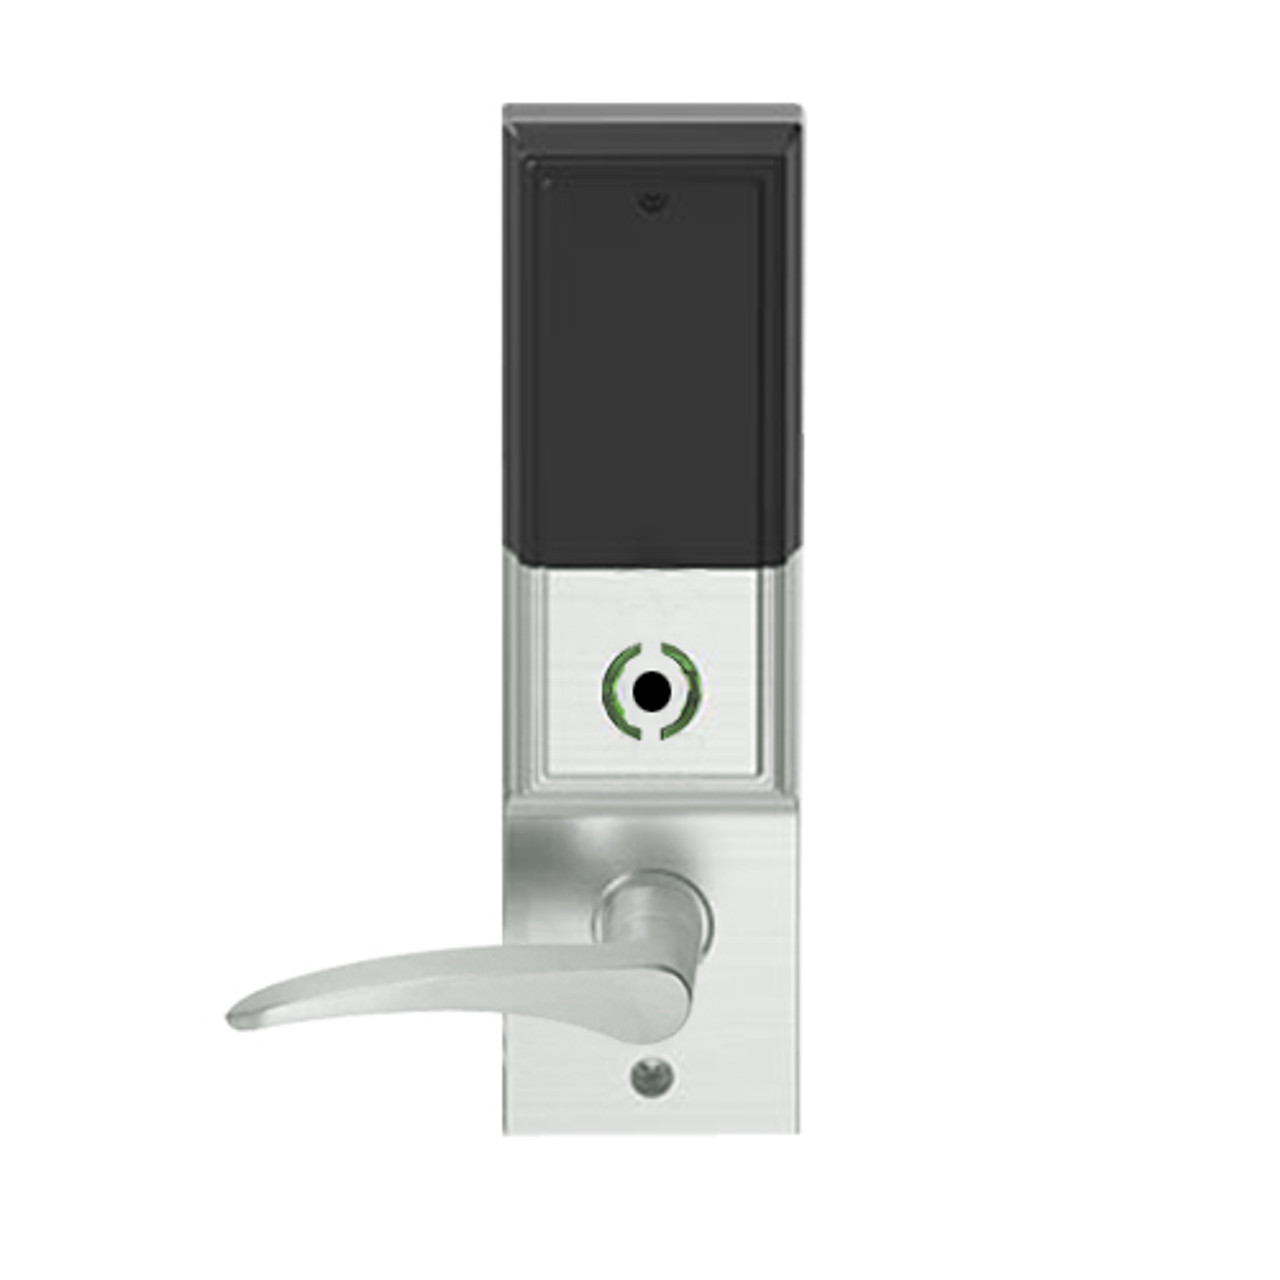 LEMB-ADD-BD-12-619-RH Schlage Privacy/Office Wireless Addison Mortise Lock with Push Button, LED and 12 Lever Prepped for SFIC in Satin Nickel